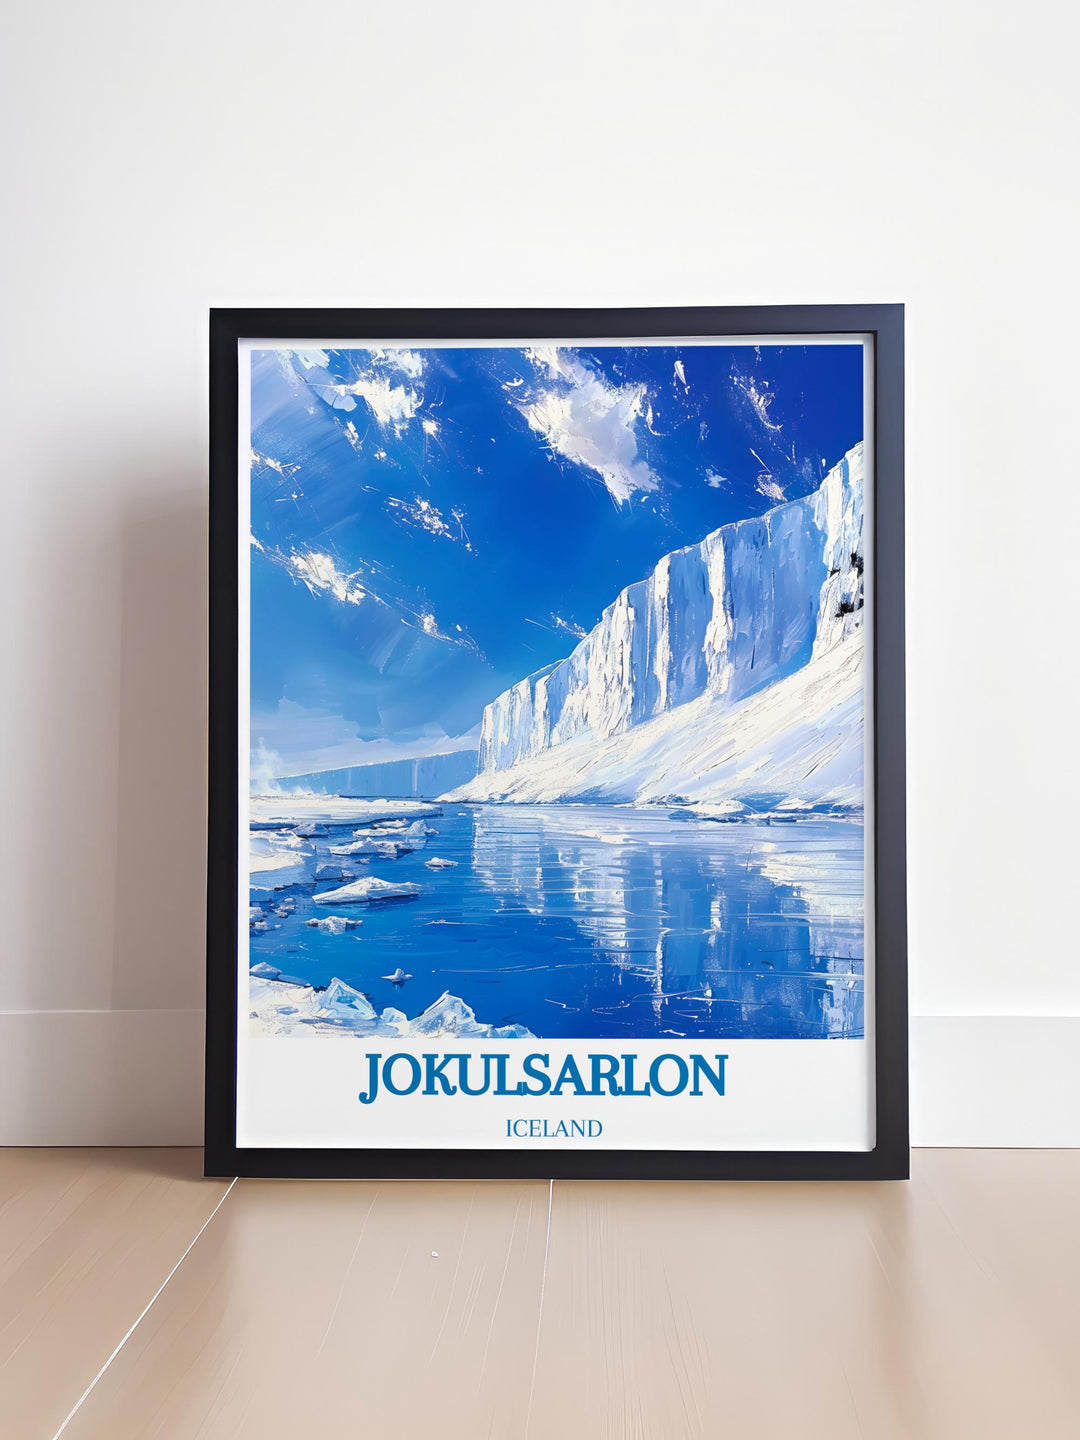 Vatnajokull glacier wall art capturing the expansive ice fields and intricate crevasses ideal for an office or study